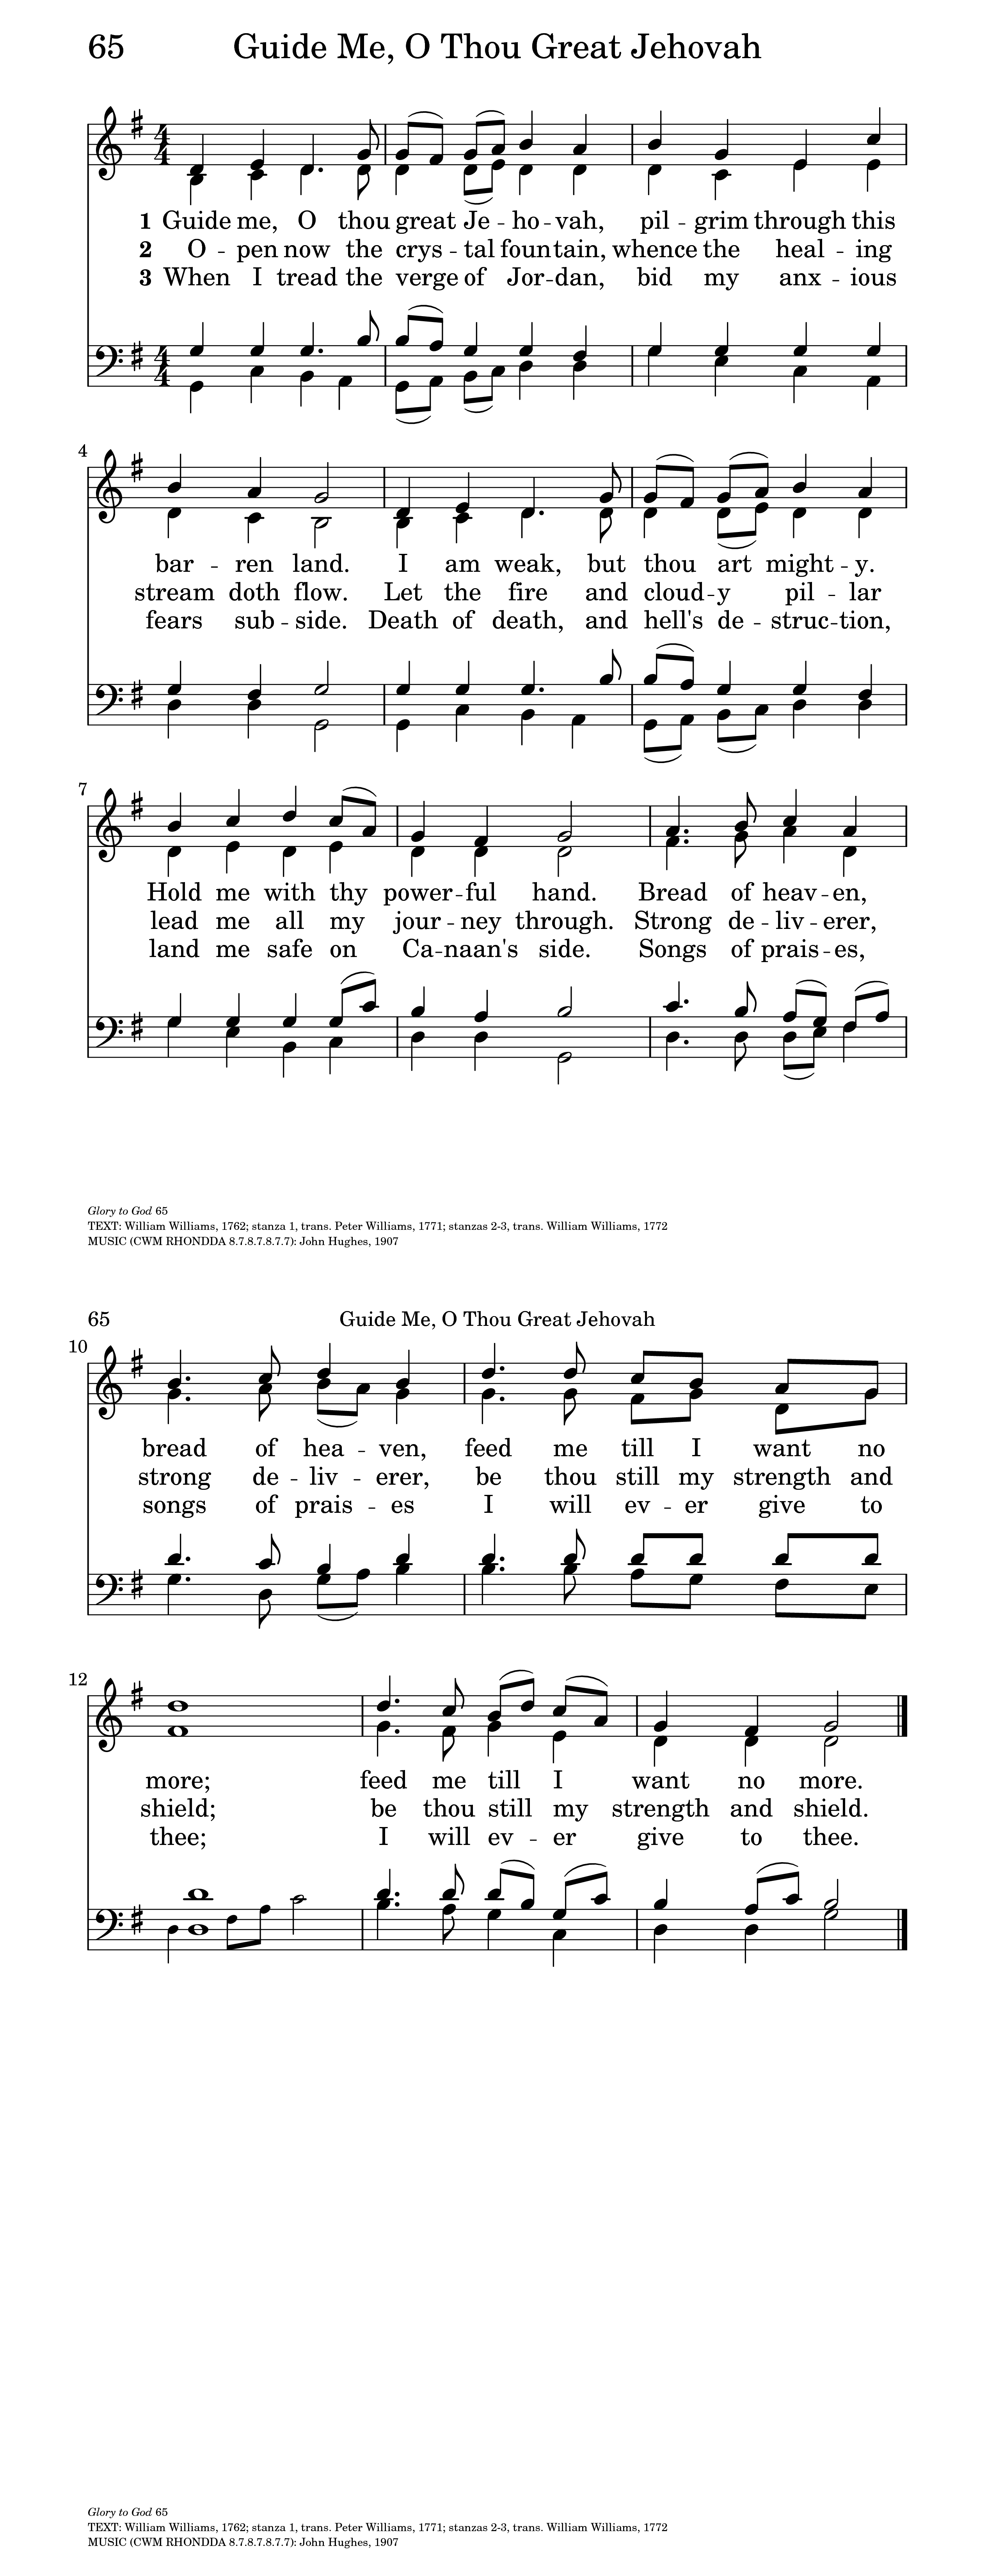 Guide me, O Thou great Jehovah | Hymnary.org